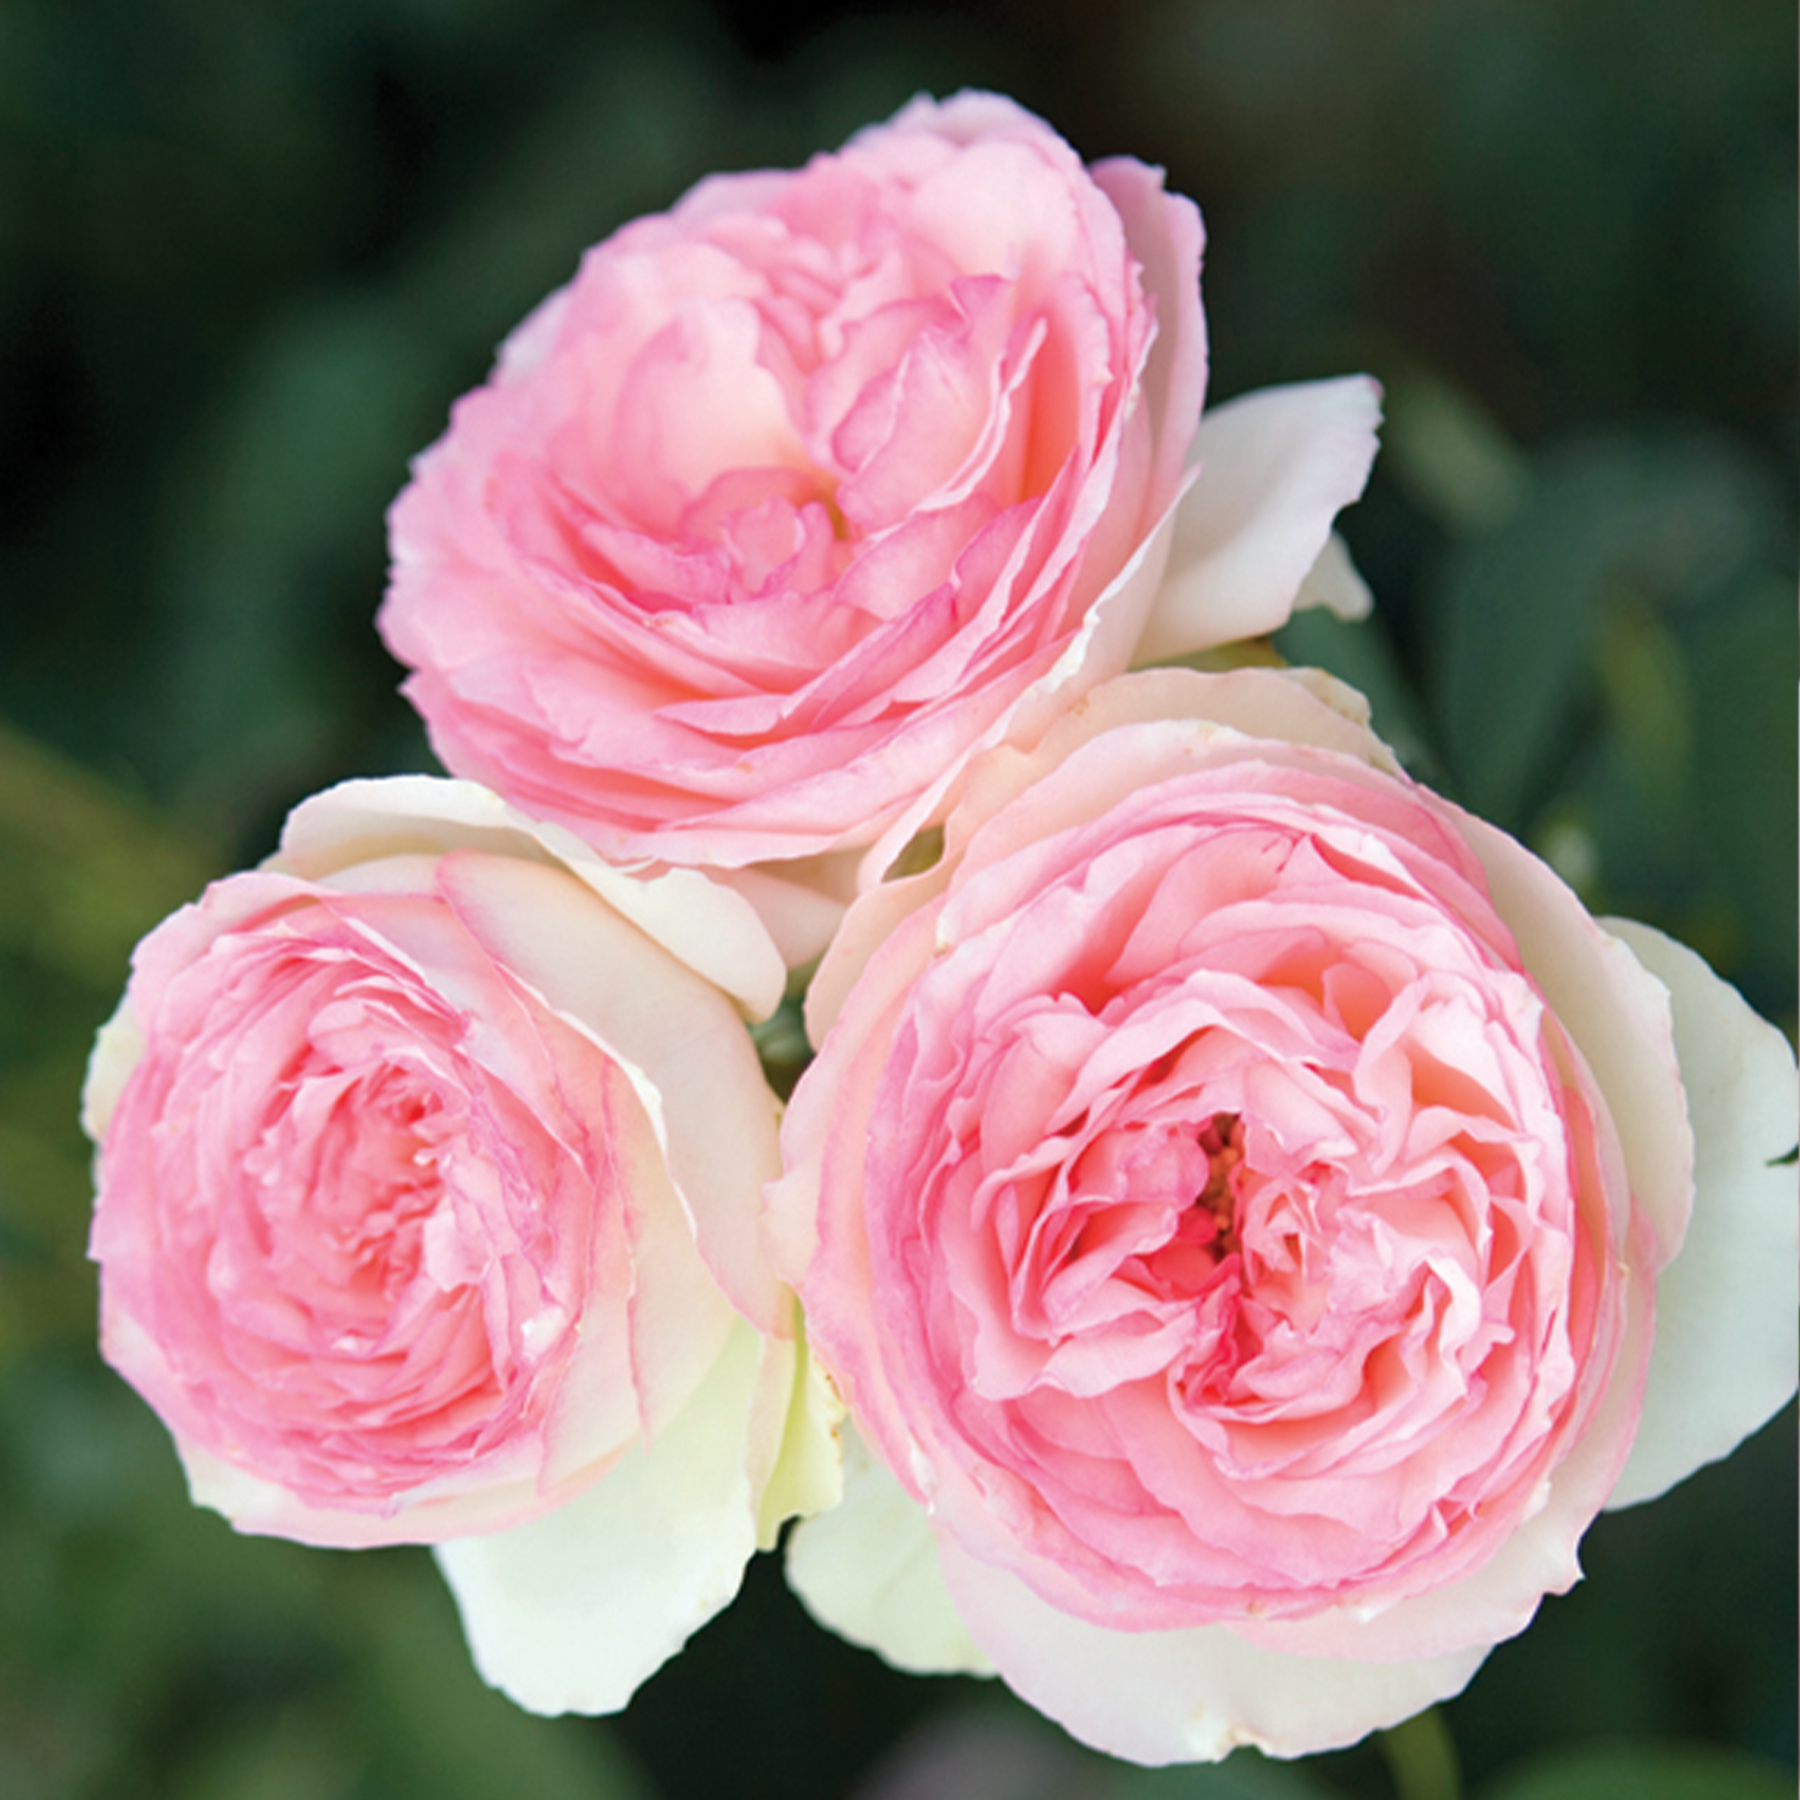 Roses in a bundle of three